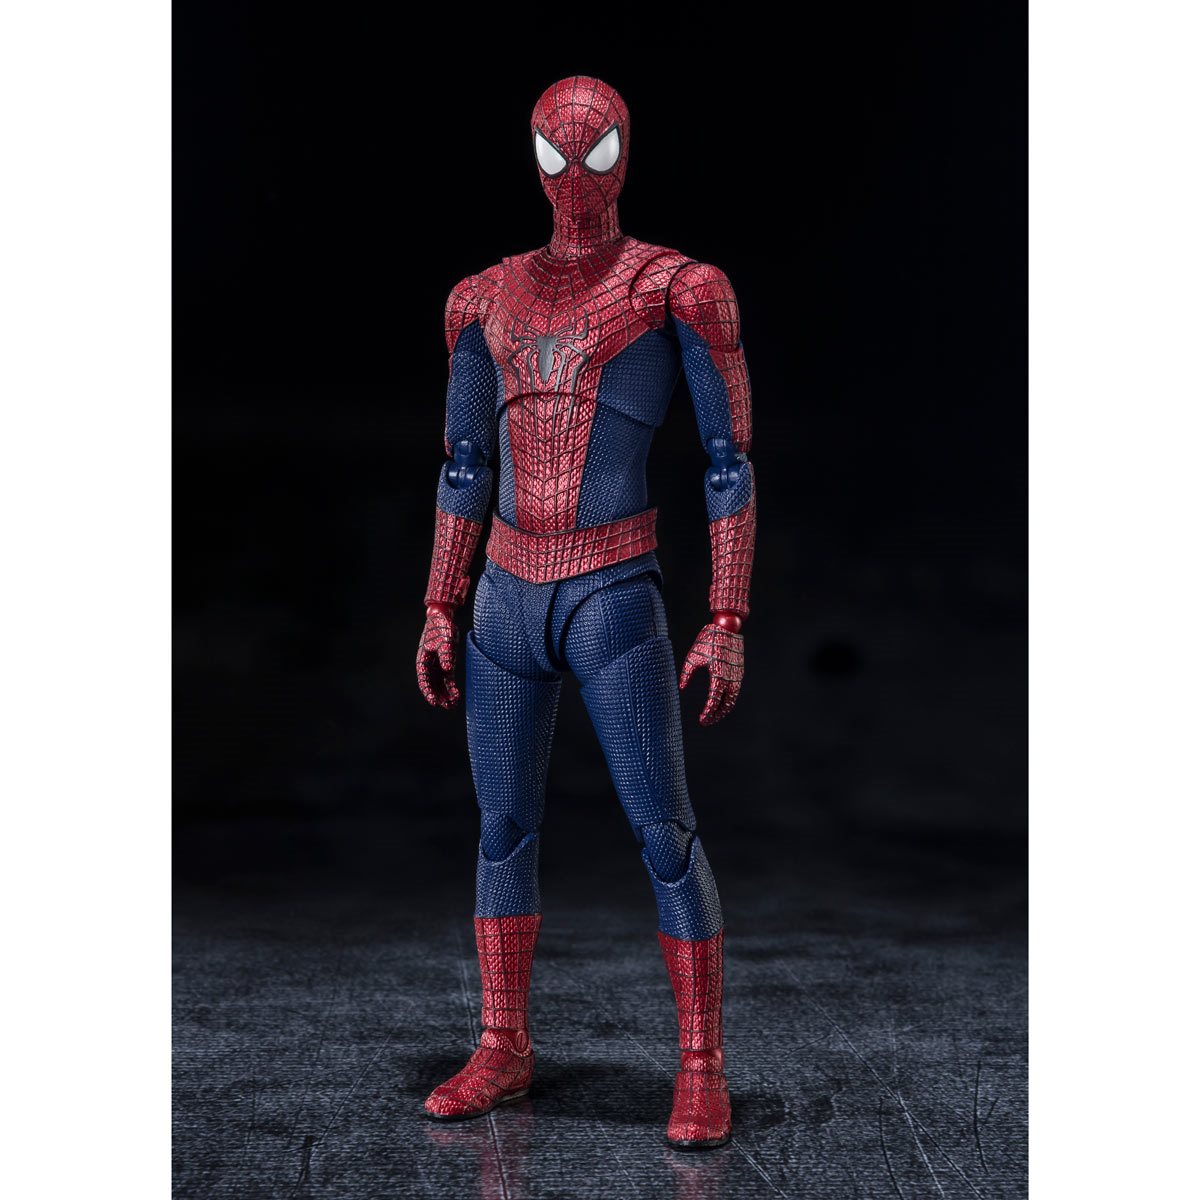 The Amazing Spider-Man Action Figure by SH Figuarts -SH Figuarts - India - www.superherotoystore.com